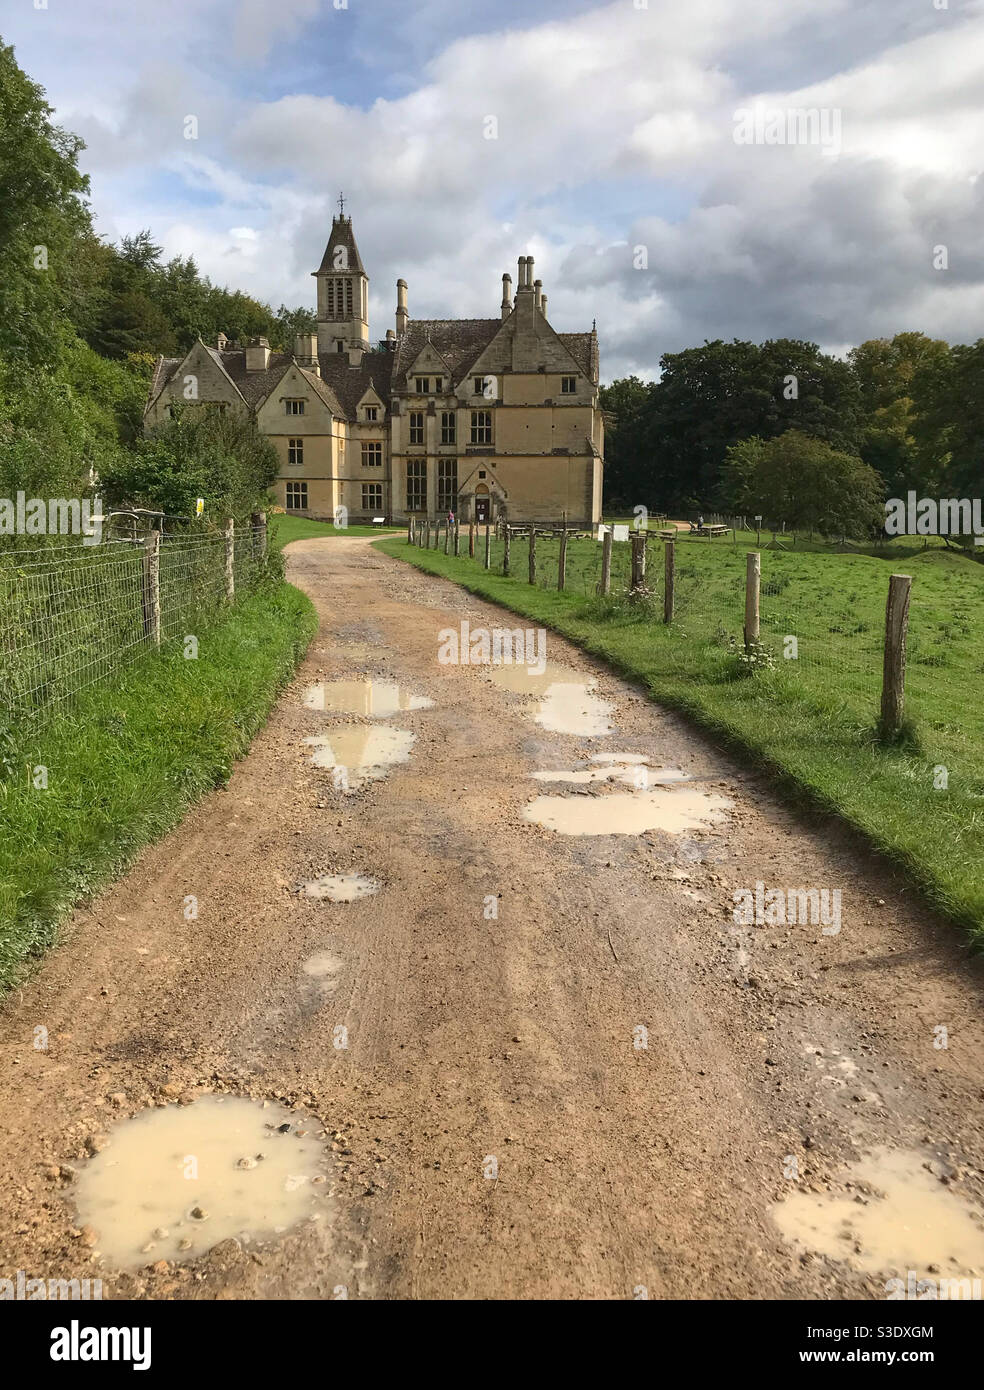 A muddy path with puddles, leading to Woodchester mansion, in Woodchester Park, in the Cotswolds. Near Stroud, Gloucestershire, England. Stock Photo